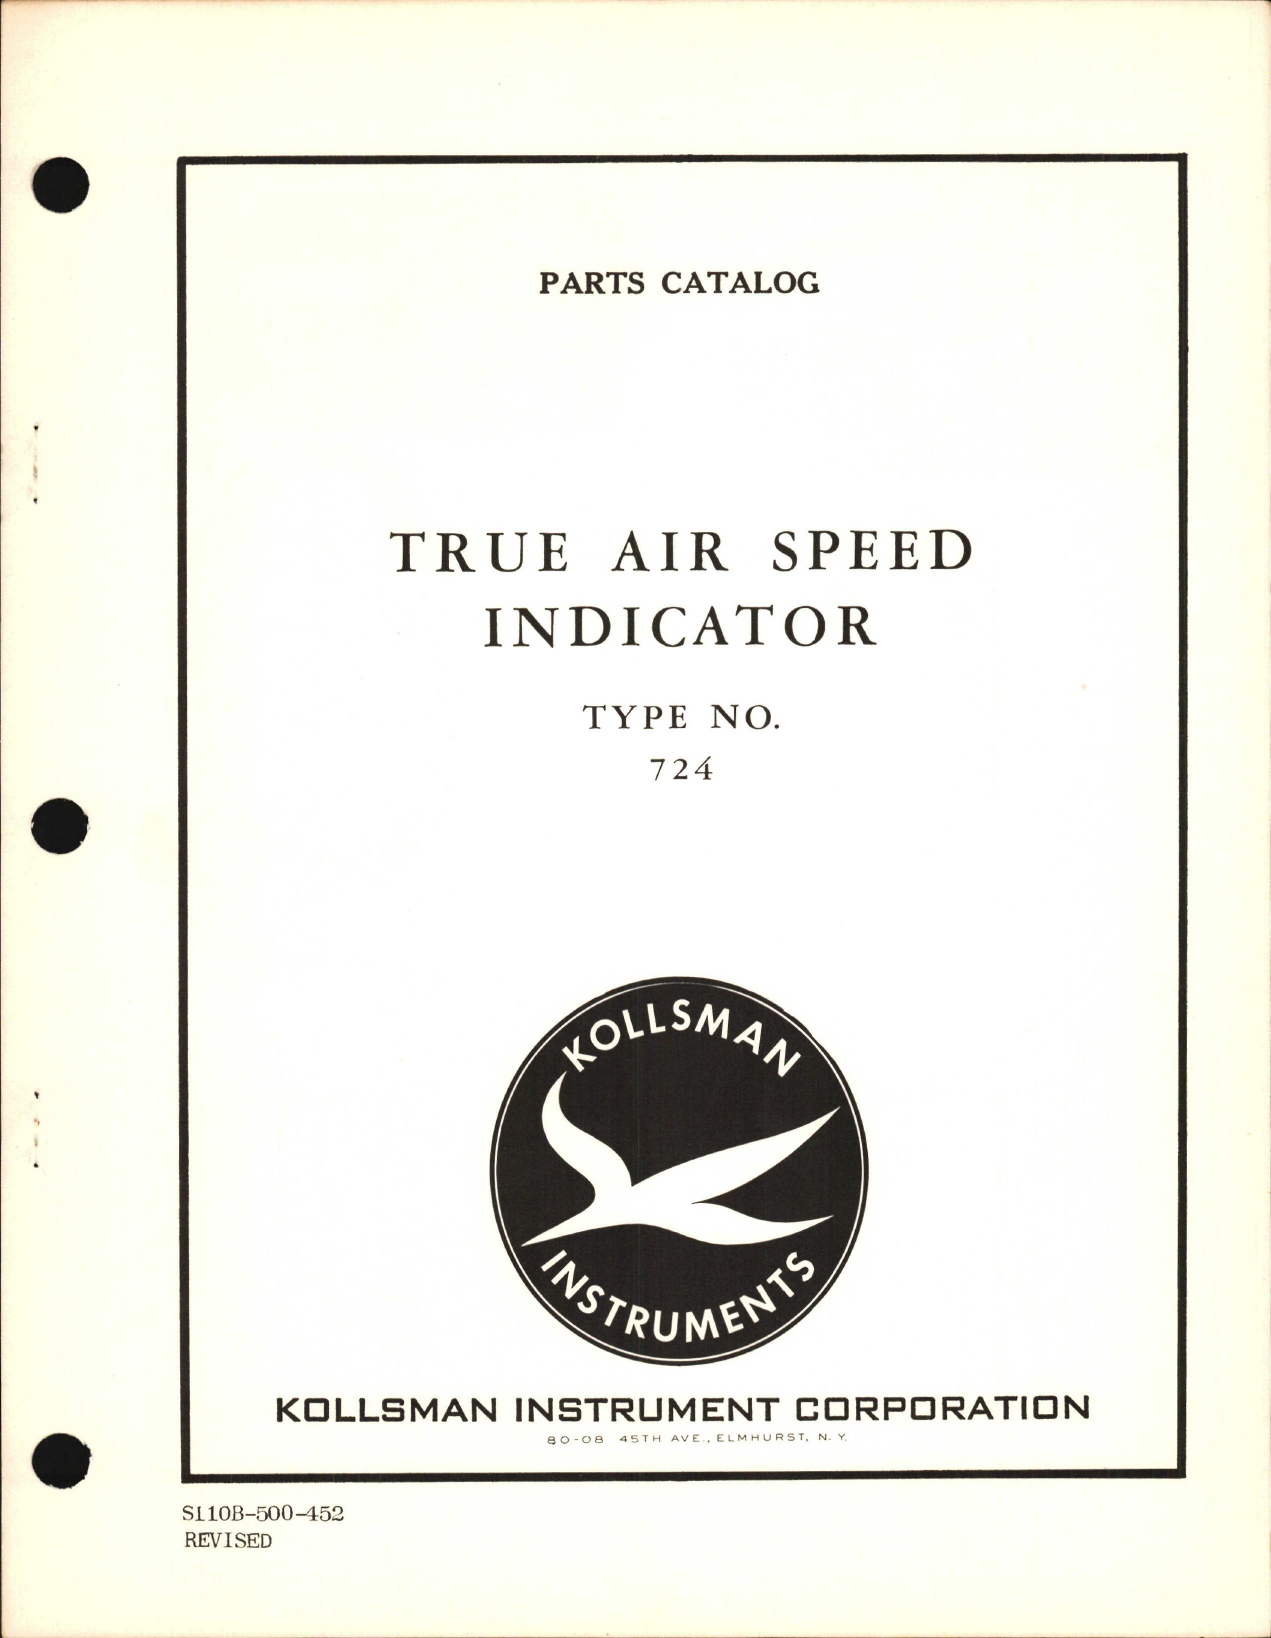 Sample page 1 from AirCorps Library document: Parts Catalog for Kollsman True Air Speed Indicator Type No. 724